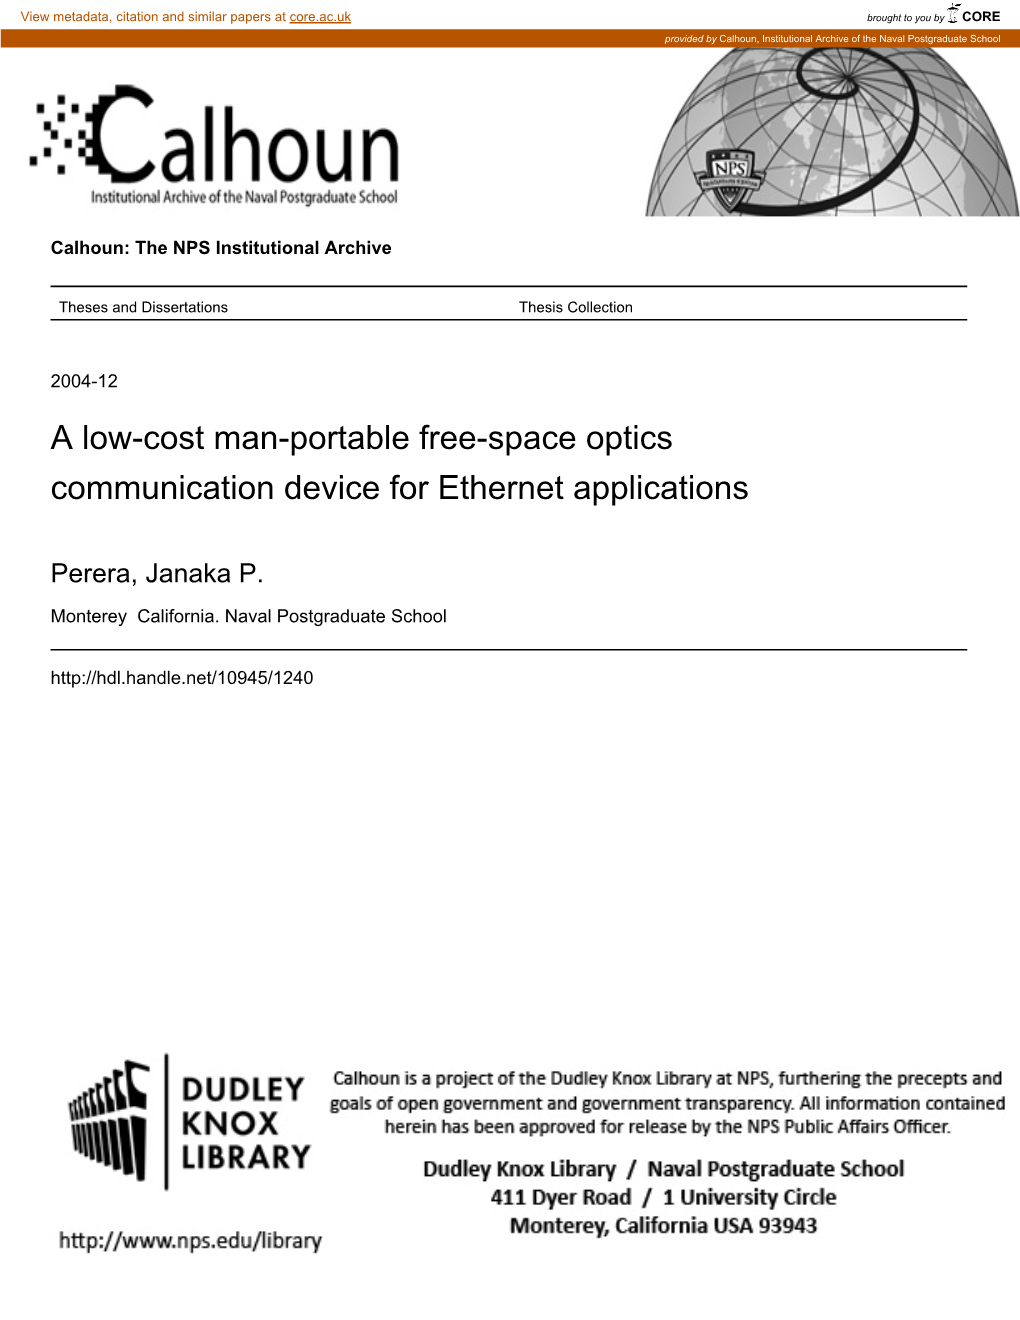 A Low-Cost Man-Portable Free-Space Optics Communication Device for Ethernet Applications